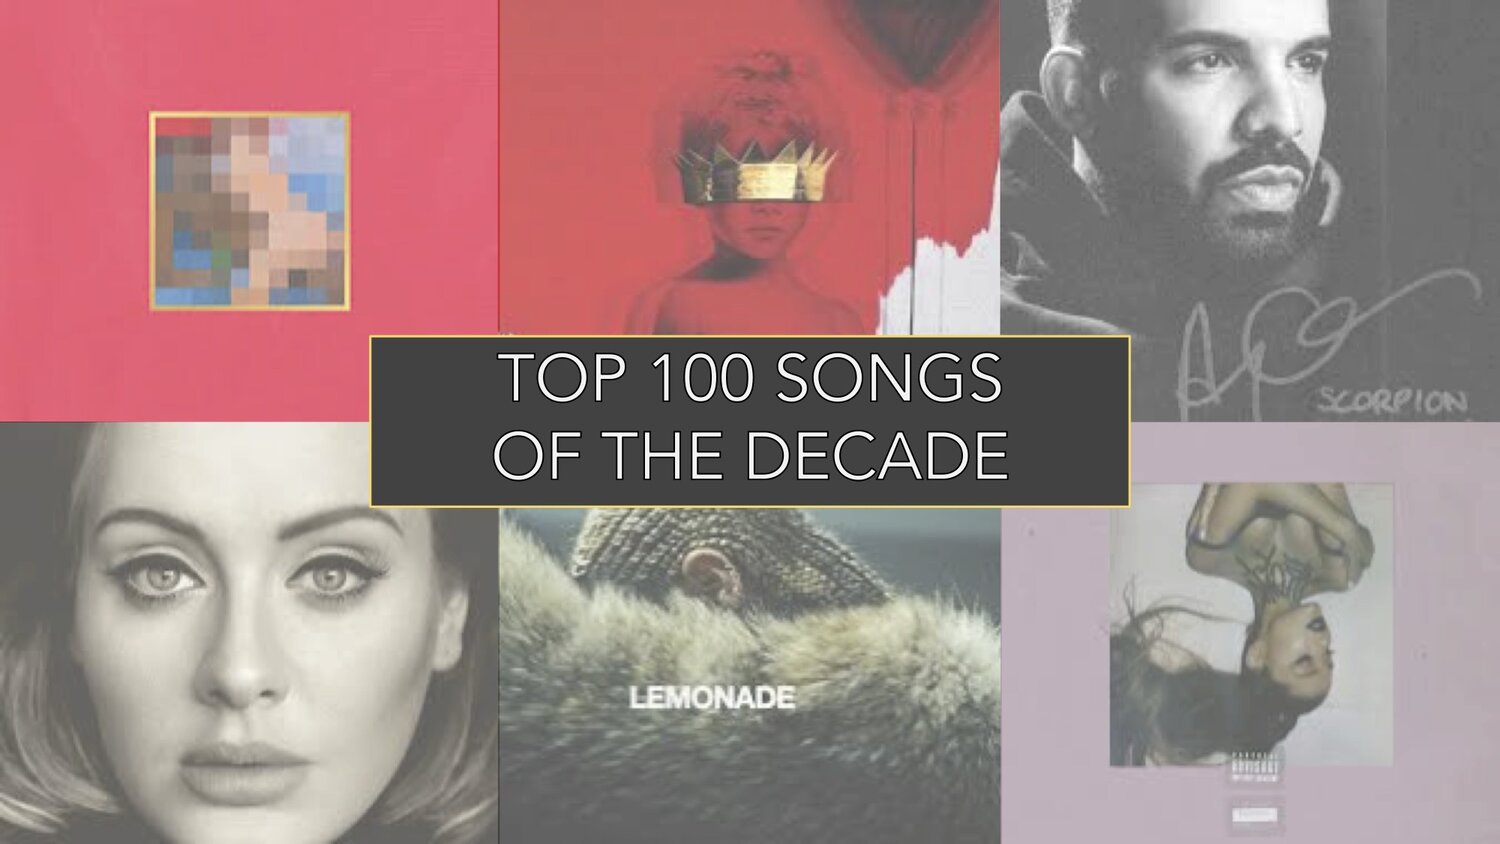 The most successful songs of the decade